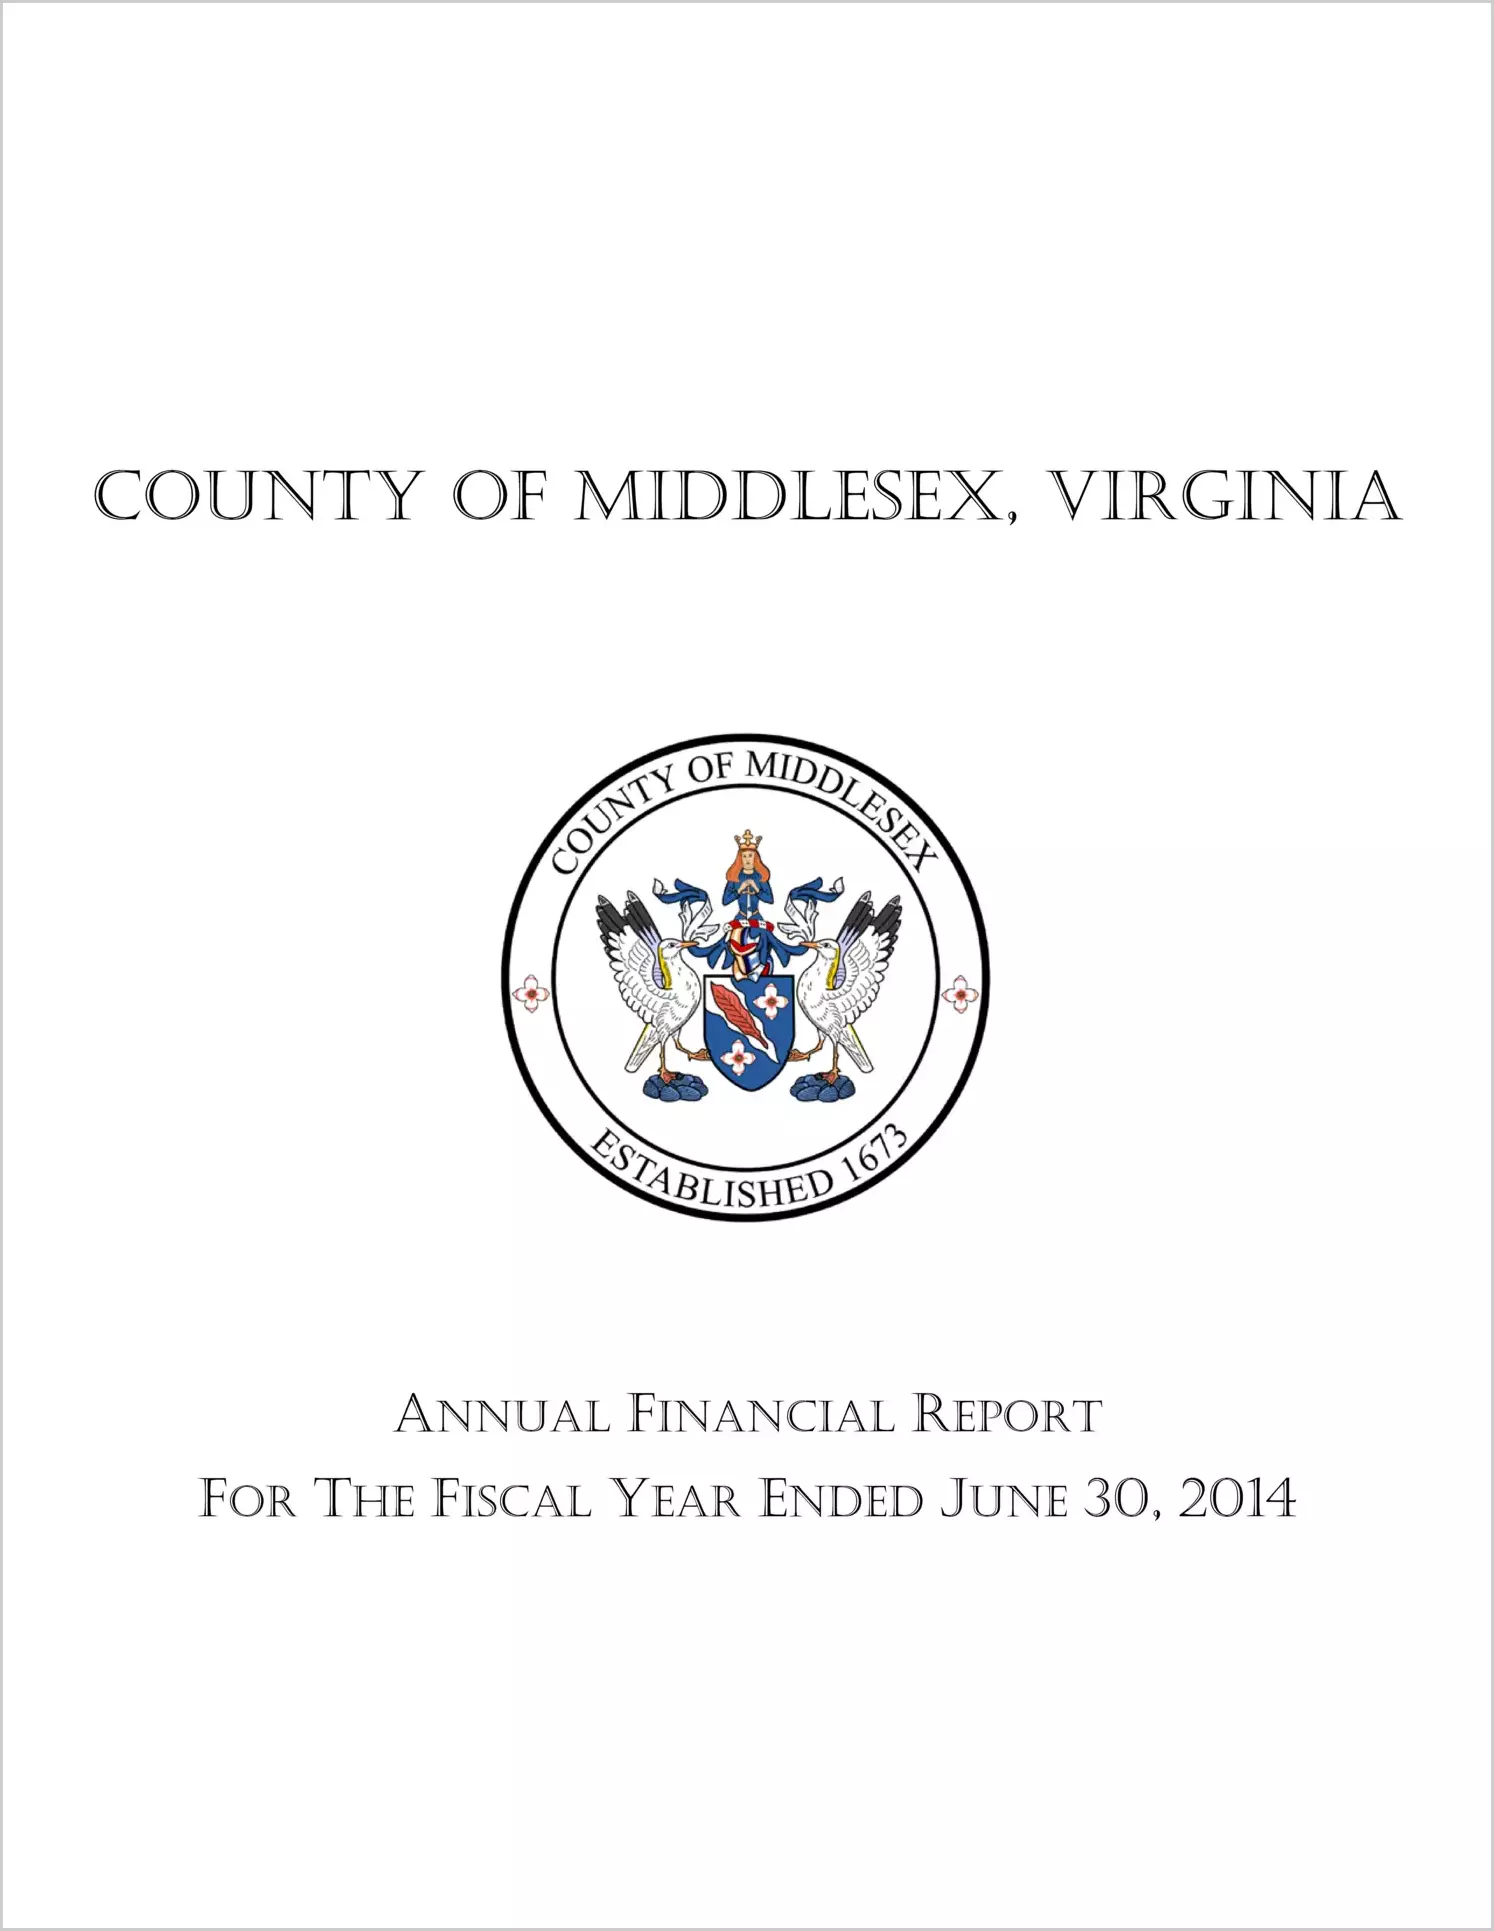 2014 Annual Financial Report for County of Middlesex